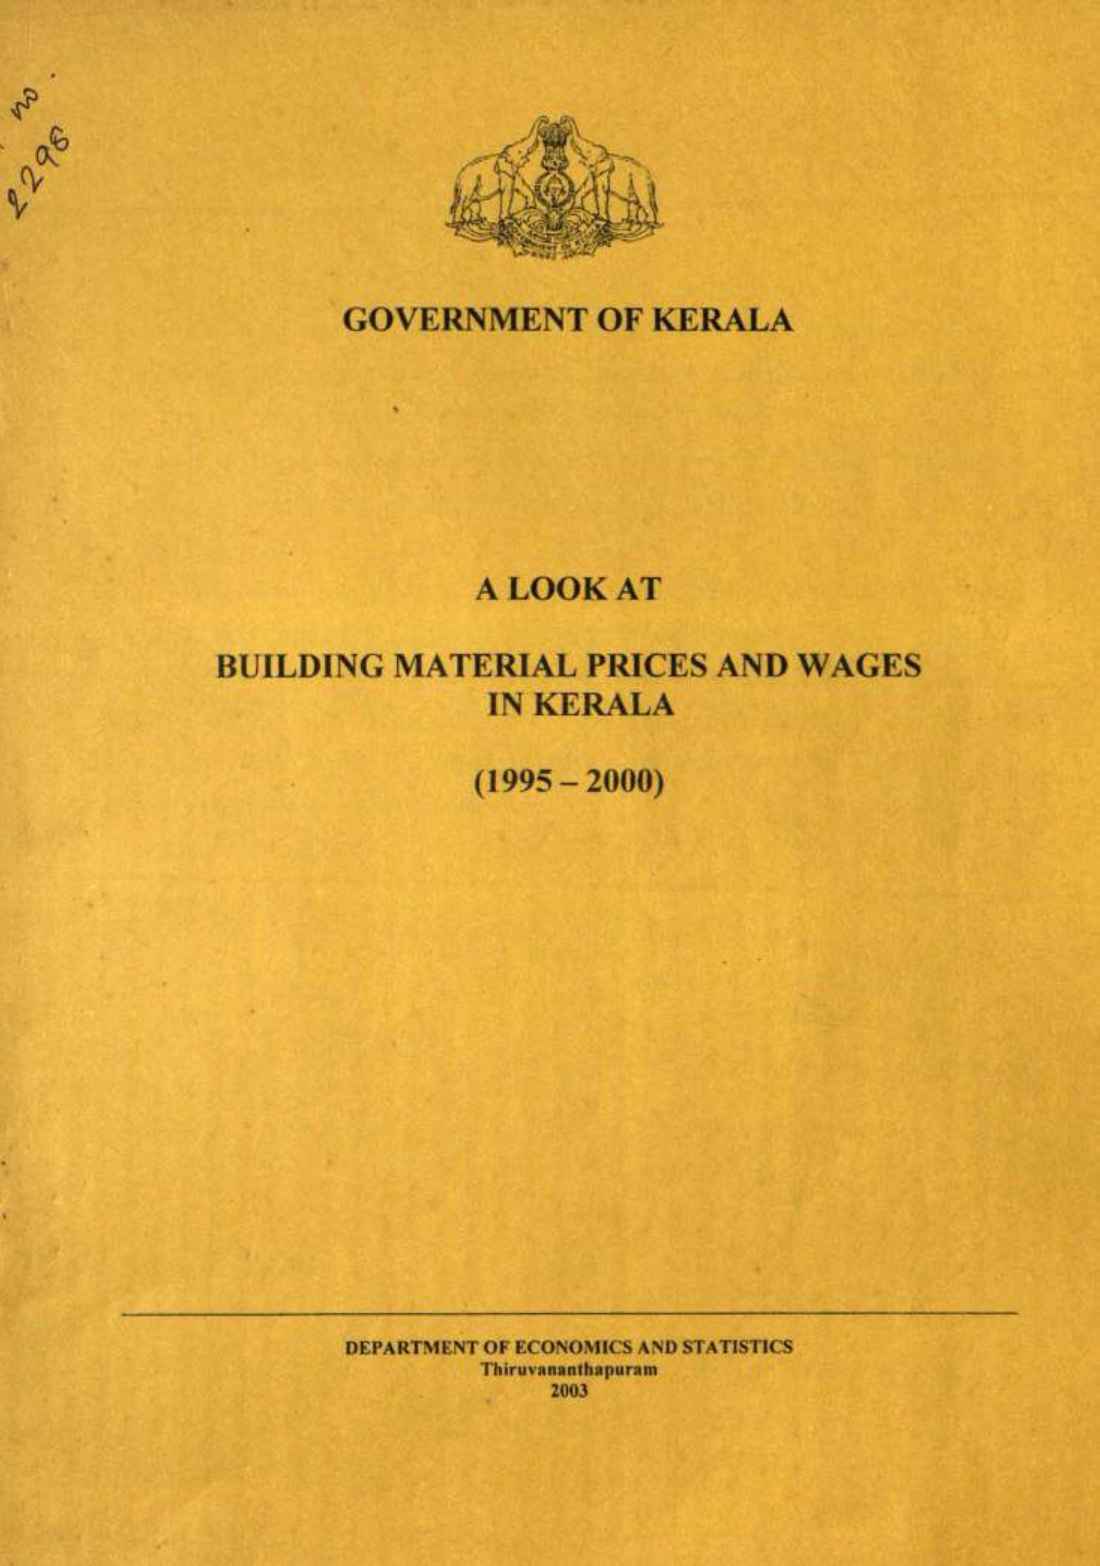 A LOOK AT BUILDING MATERIAL PRICES AND WAGES IN KERALA (1995-2000)